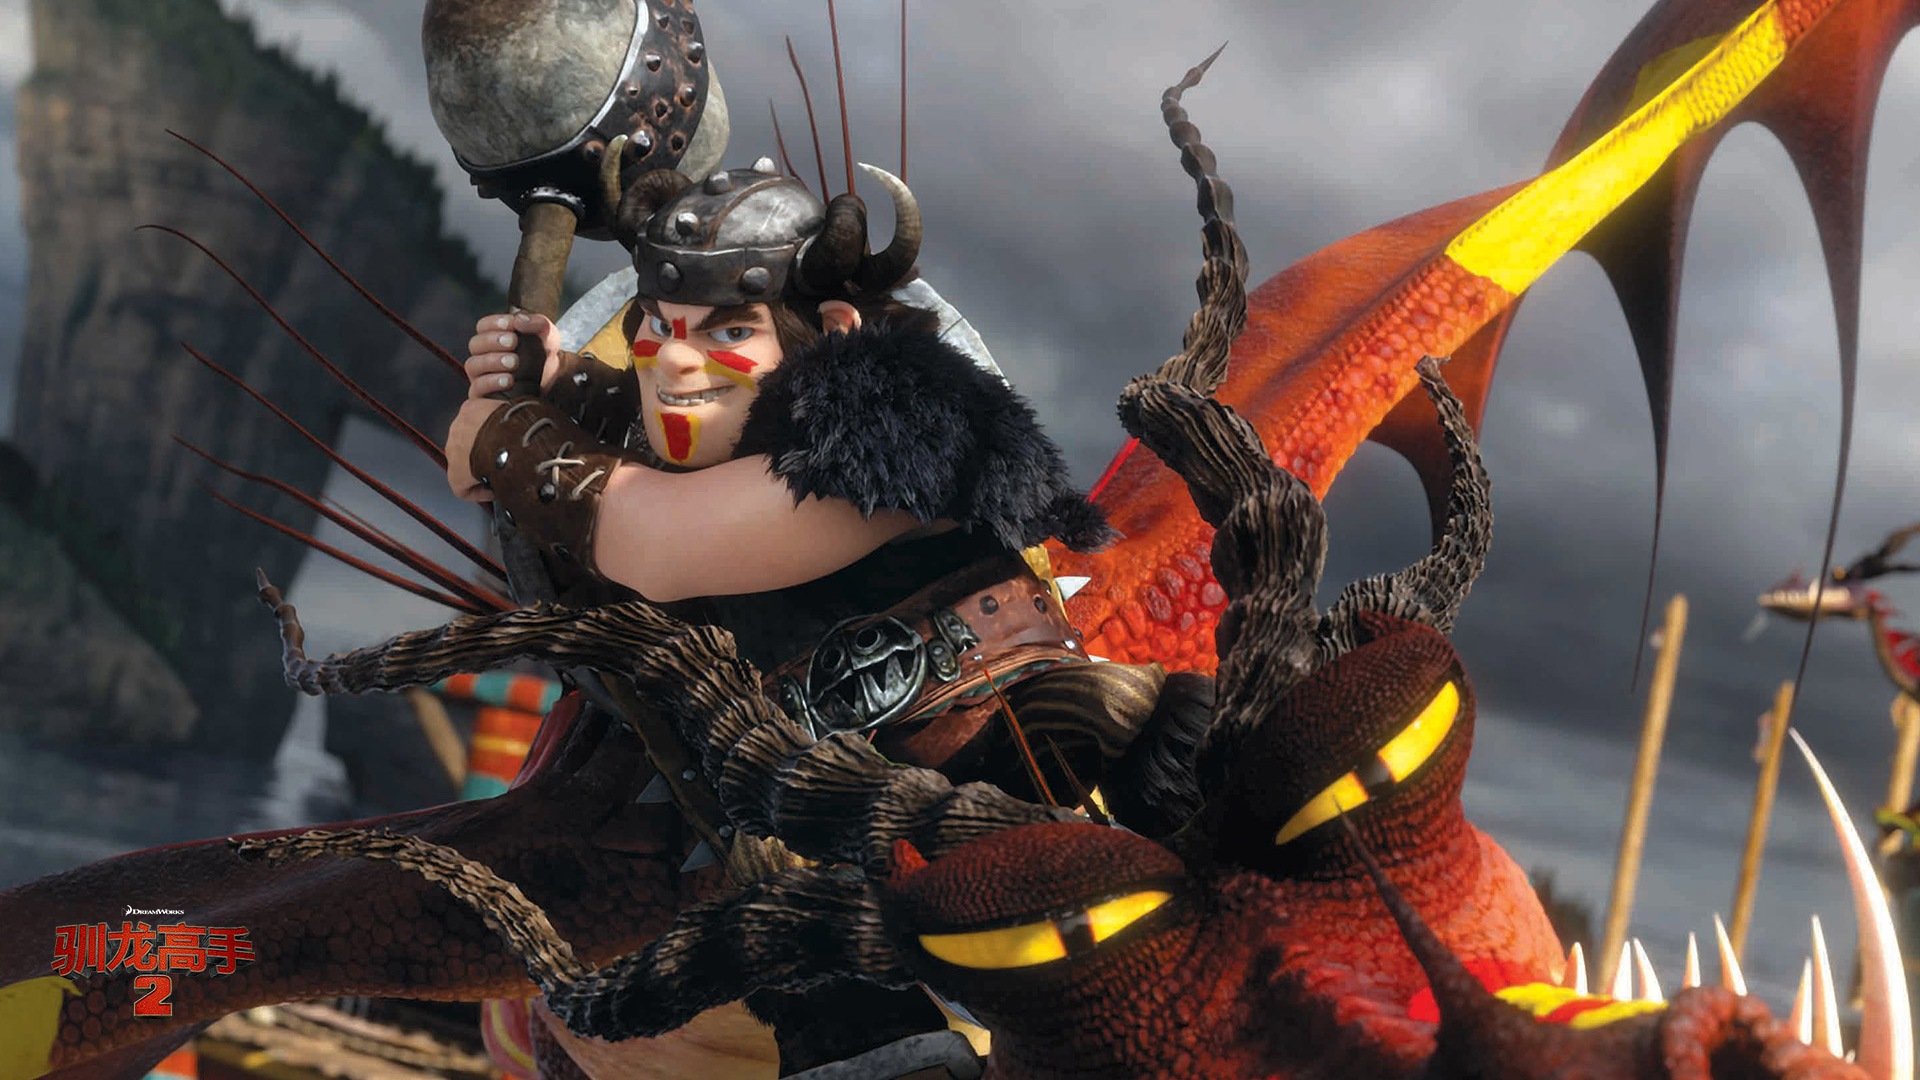 How to Train Your Dragon 2 驯龙高手2 高清壁纸12 - 1920x1080